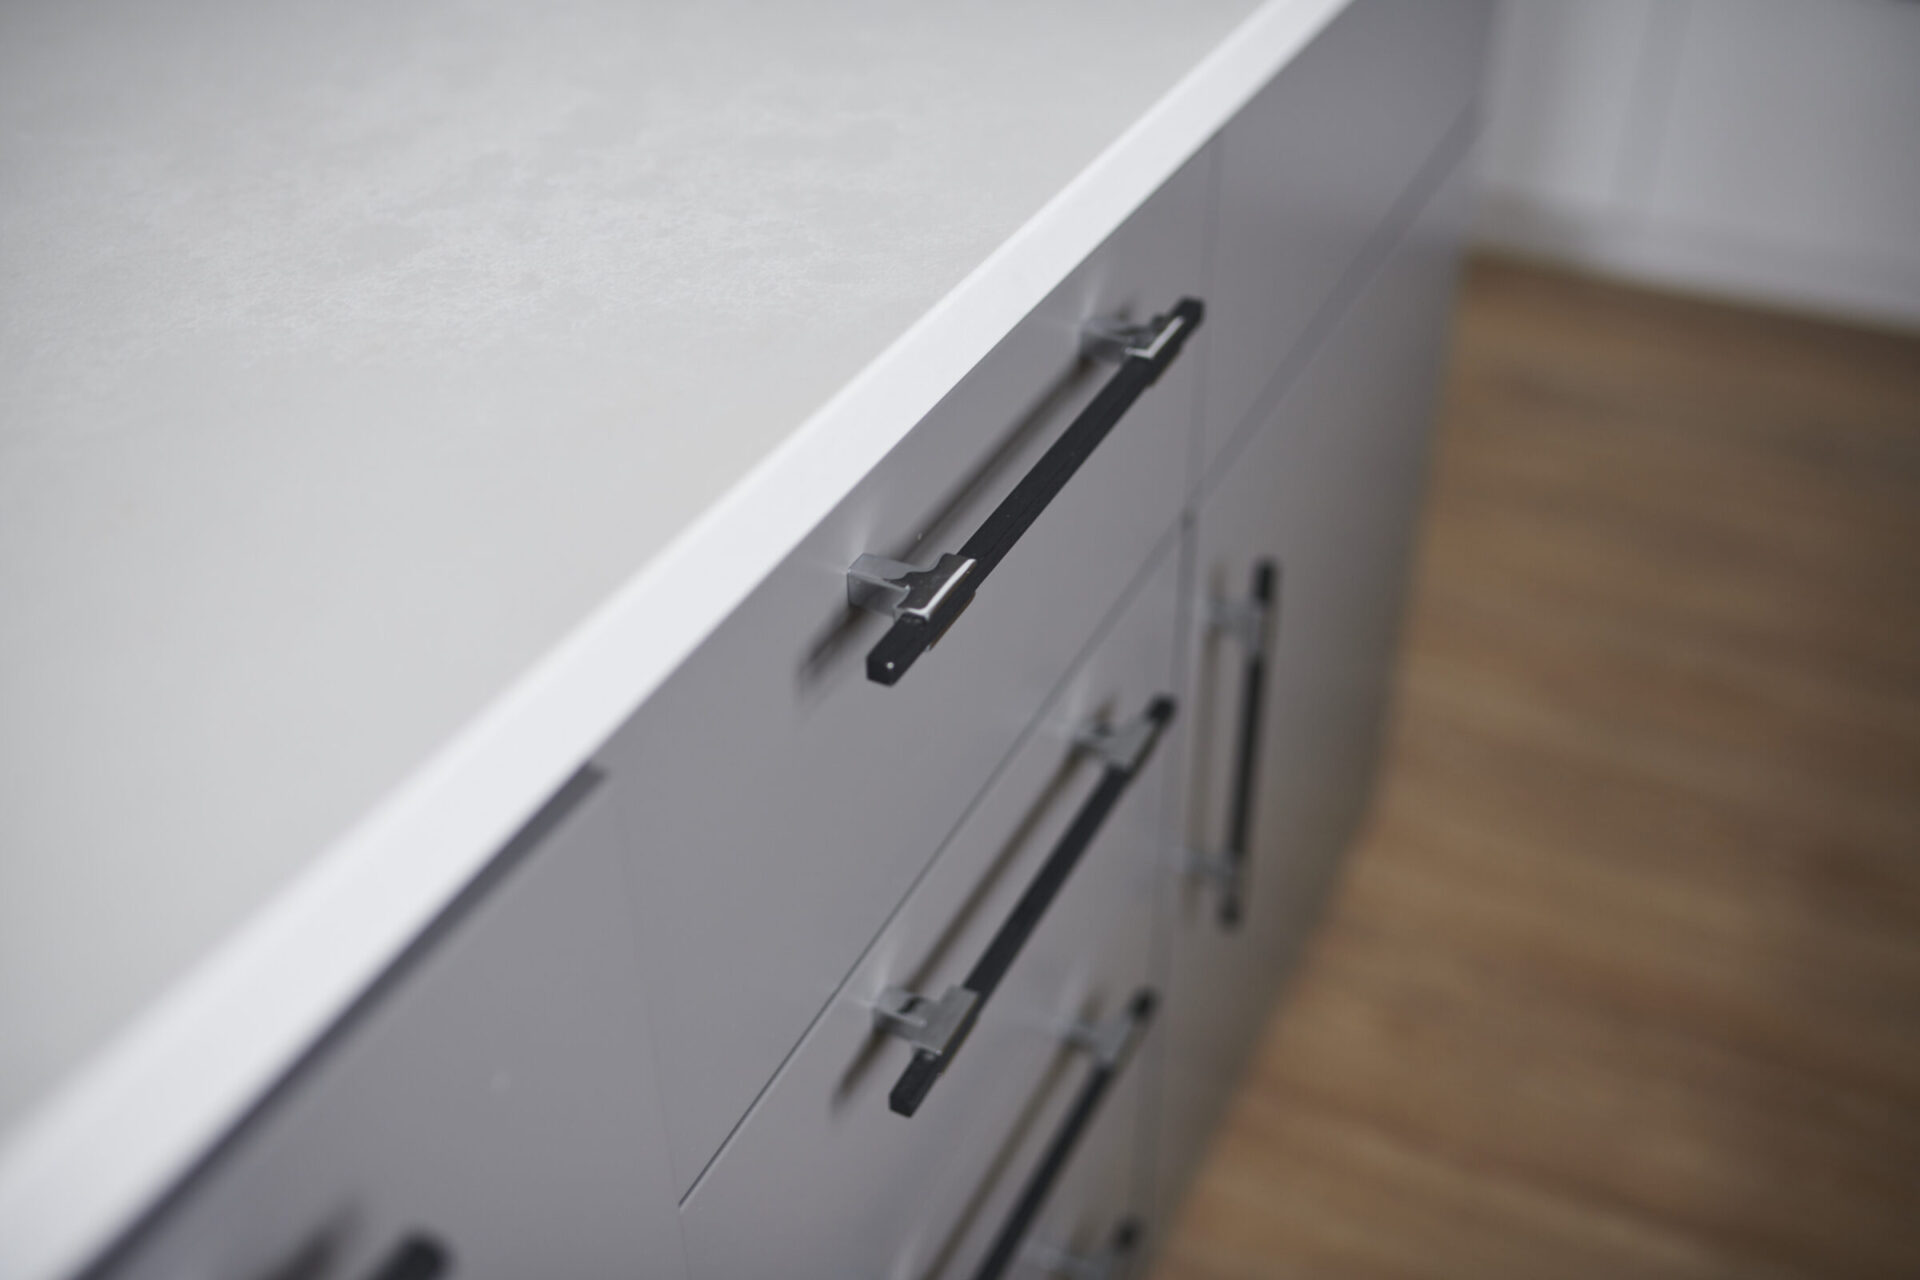 This is a close-up image of a modern kitchen cabinet with a marble countertop, featuring black handles. The focus is on the grey drawers, against a wooden floor background.